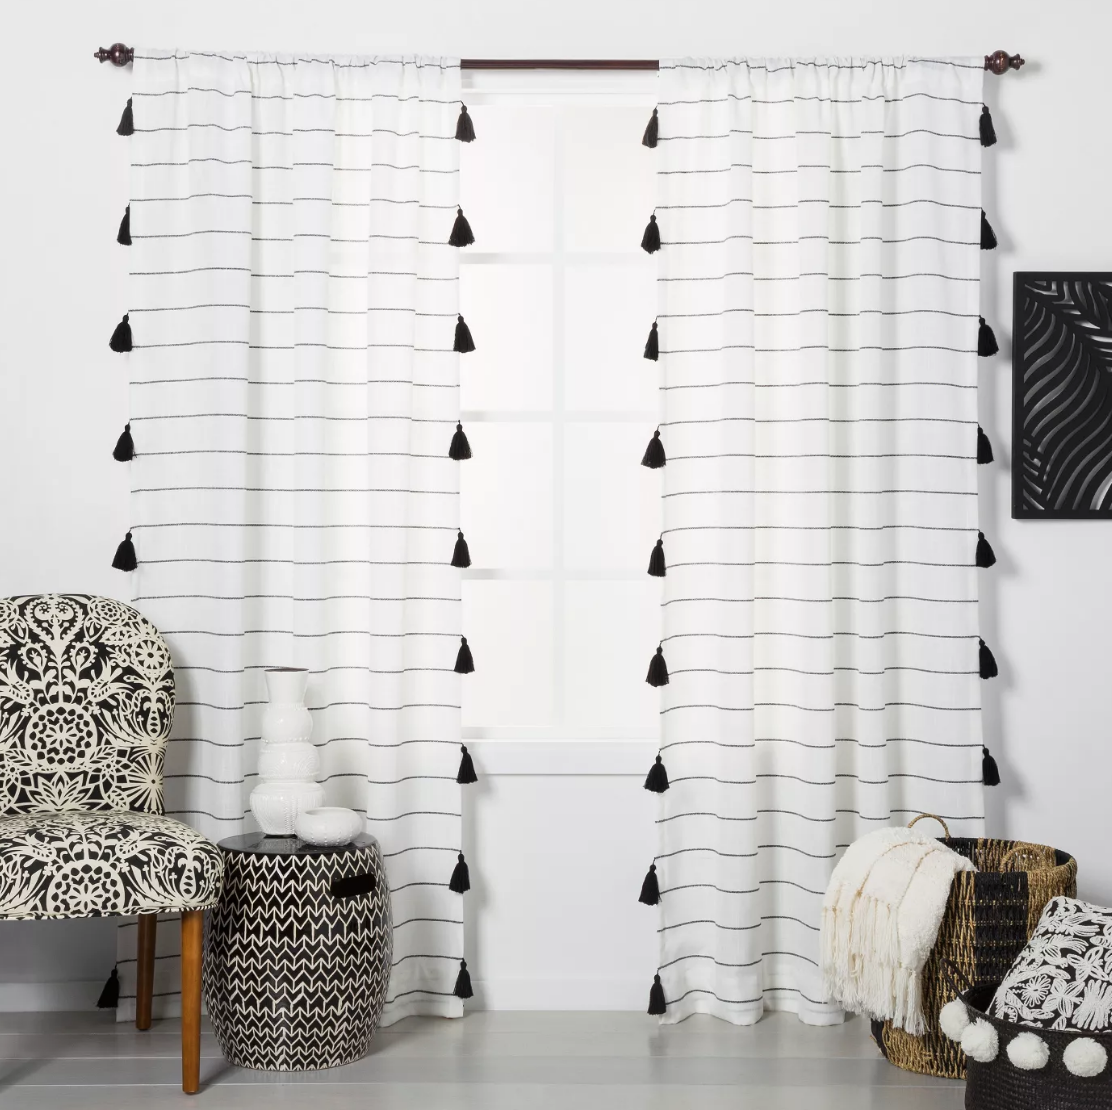 Contrast Stripe Light Filtering Curtain Panel with Tassels - $24.99